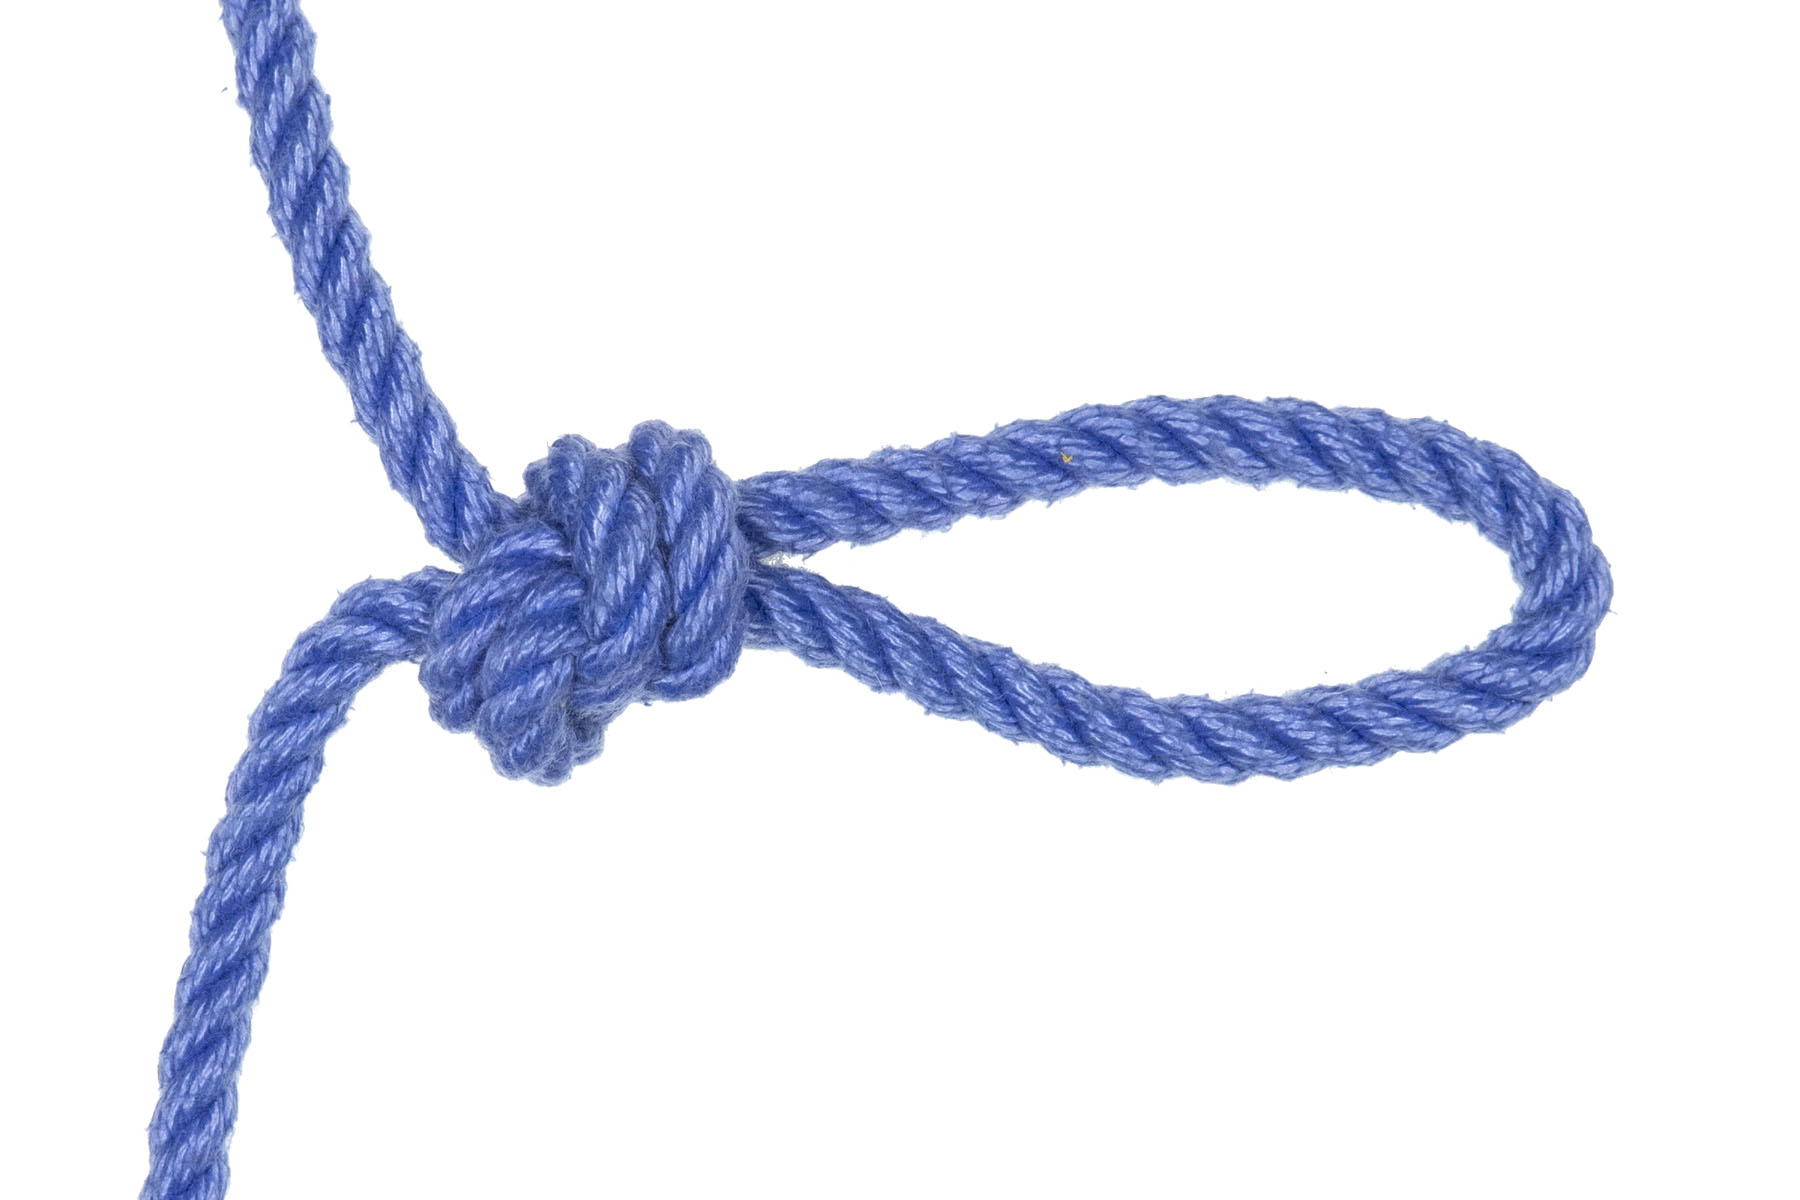 The half hitch has been pulled snug. There is a compact half hitch tied in doubled rope, with a four inch loop of rope extending out to the right.